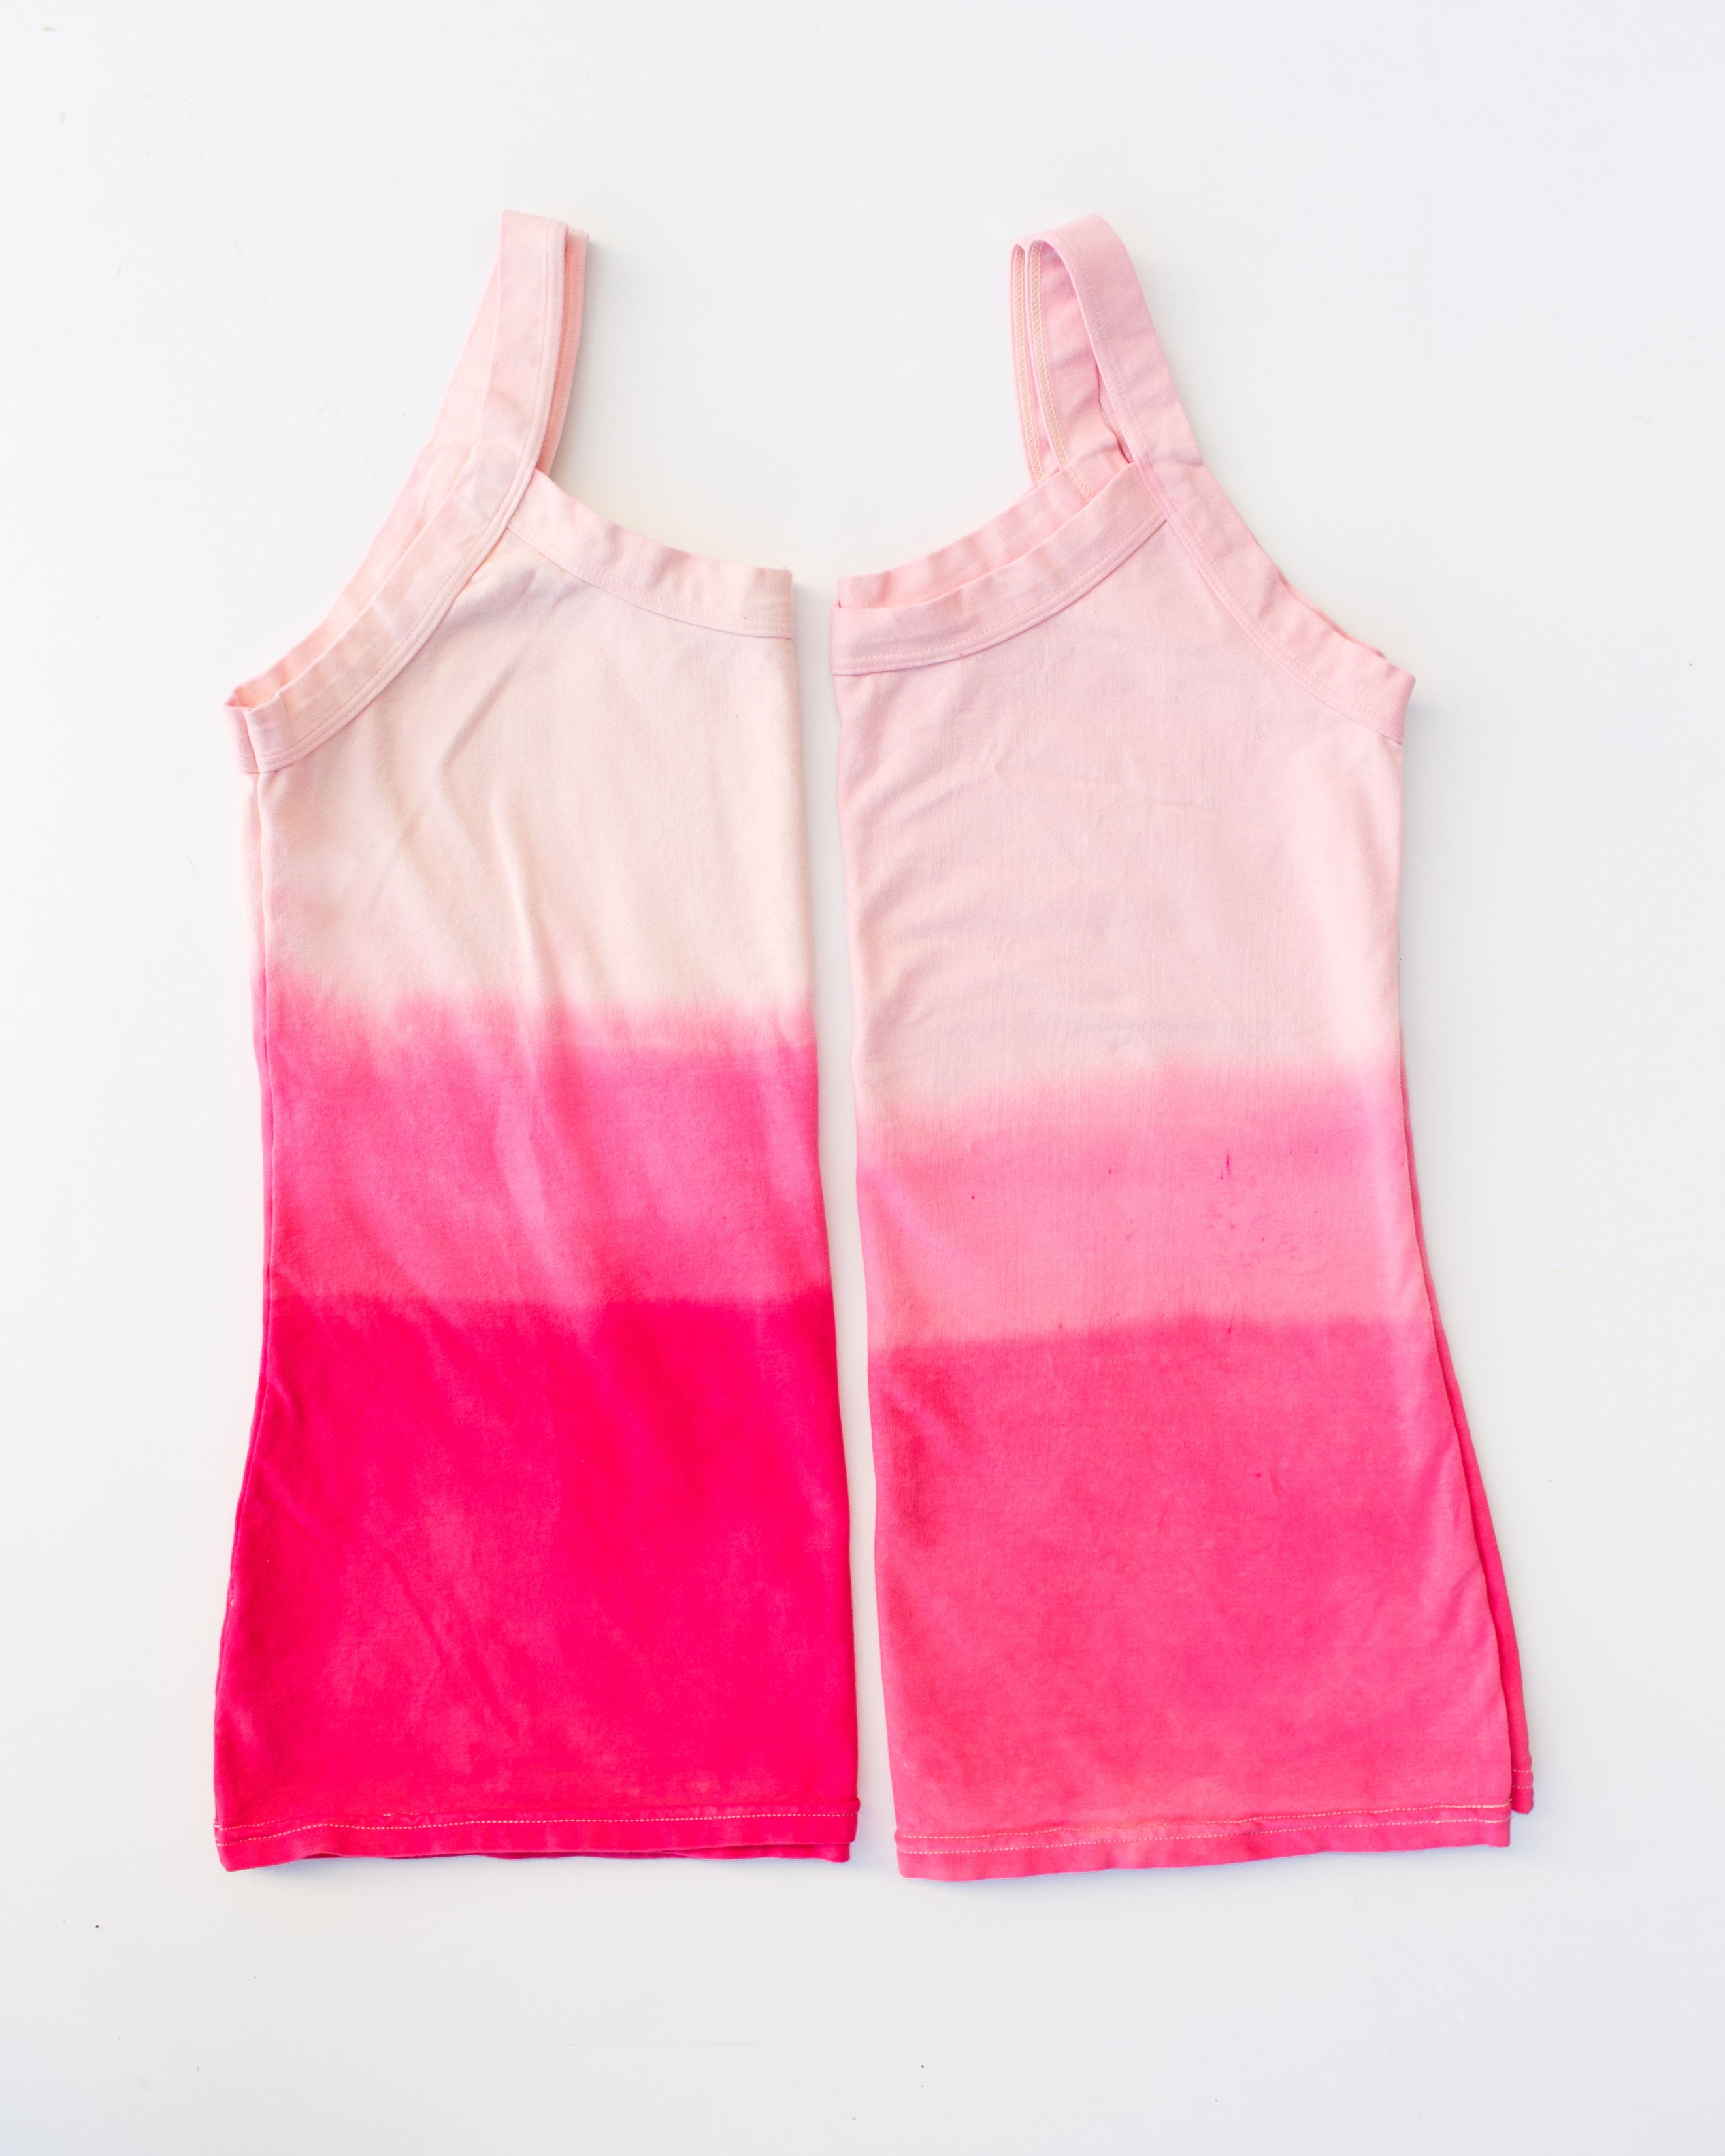 Flat lay of Thunderpants organic cotton Camisoles in Valentine's Day Dip Dye ombre pinks.